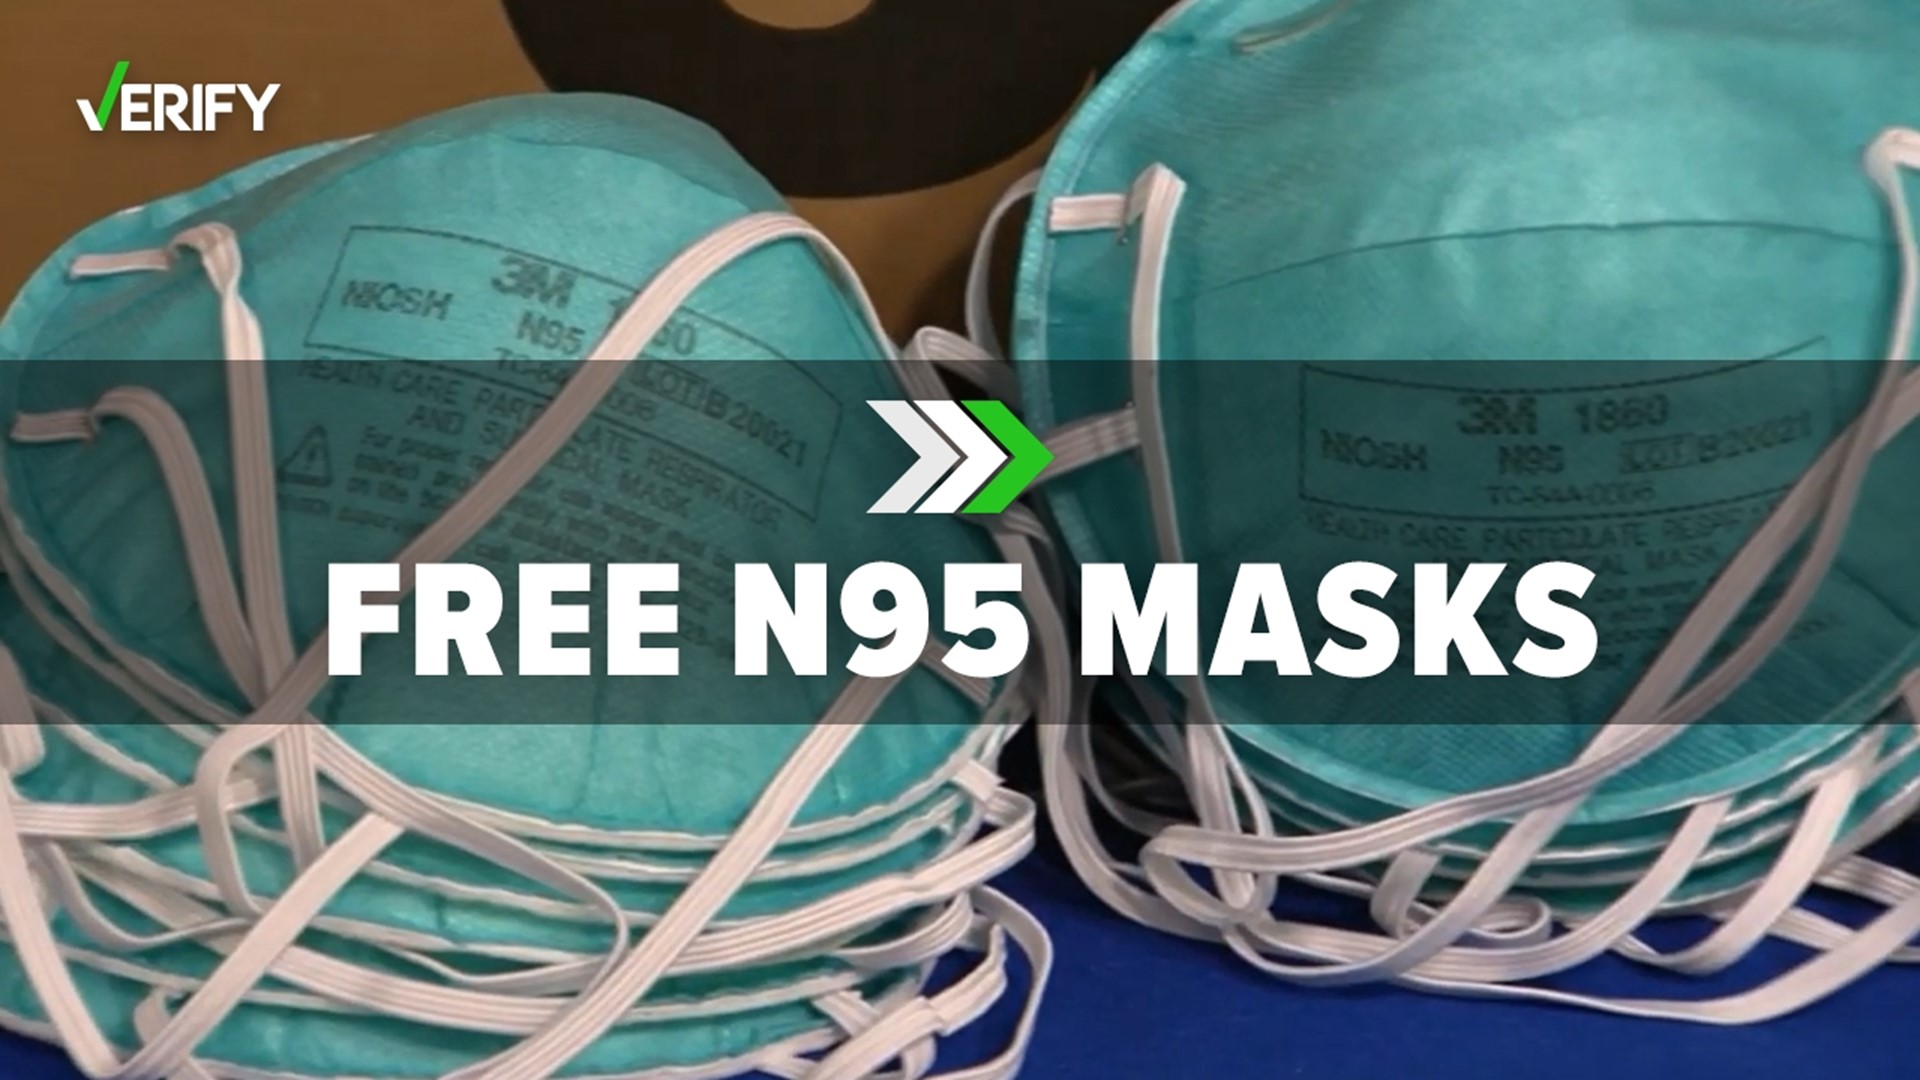 Are free N95 masks available at your local drugstore? If so, how many? The VERIFY team looks into these questions.